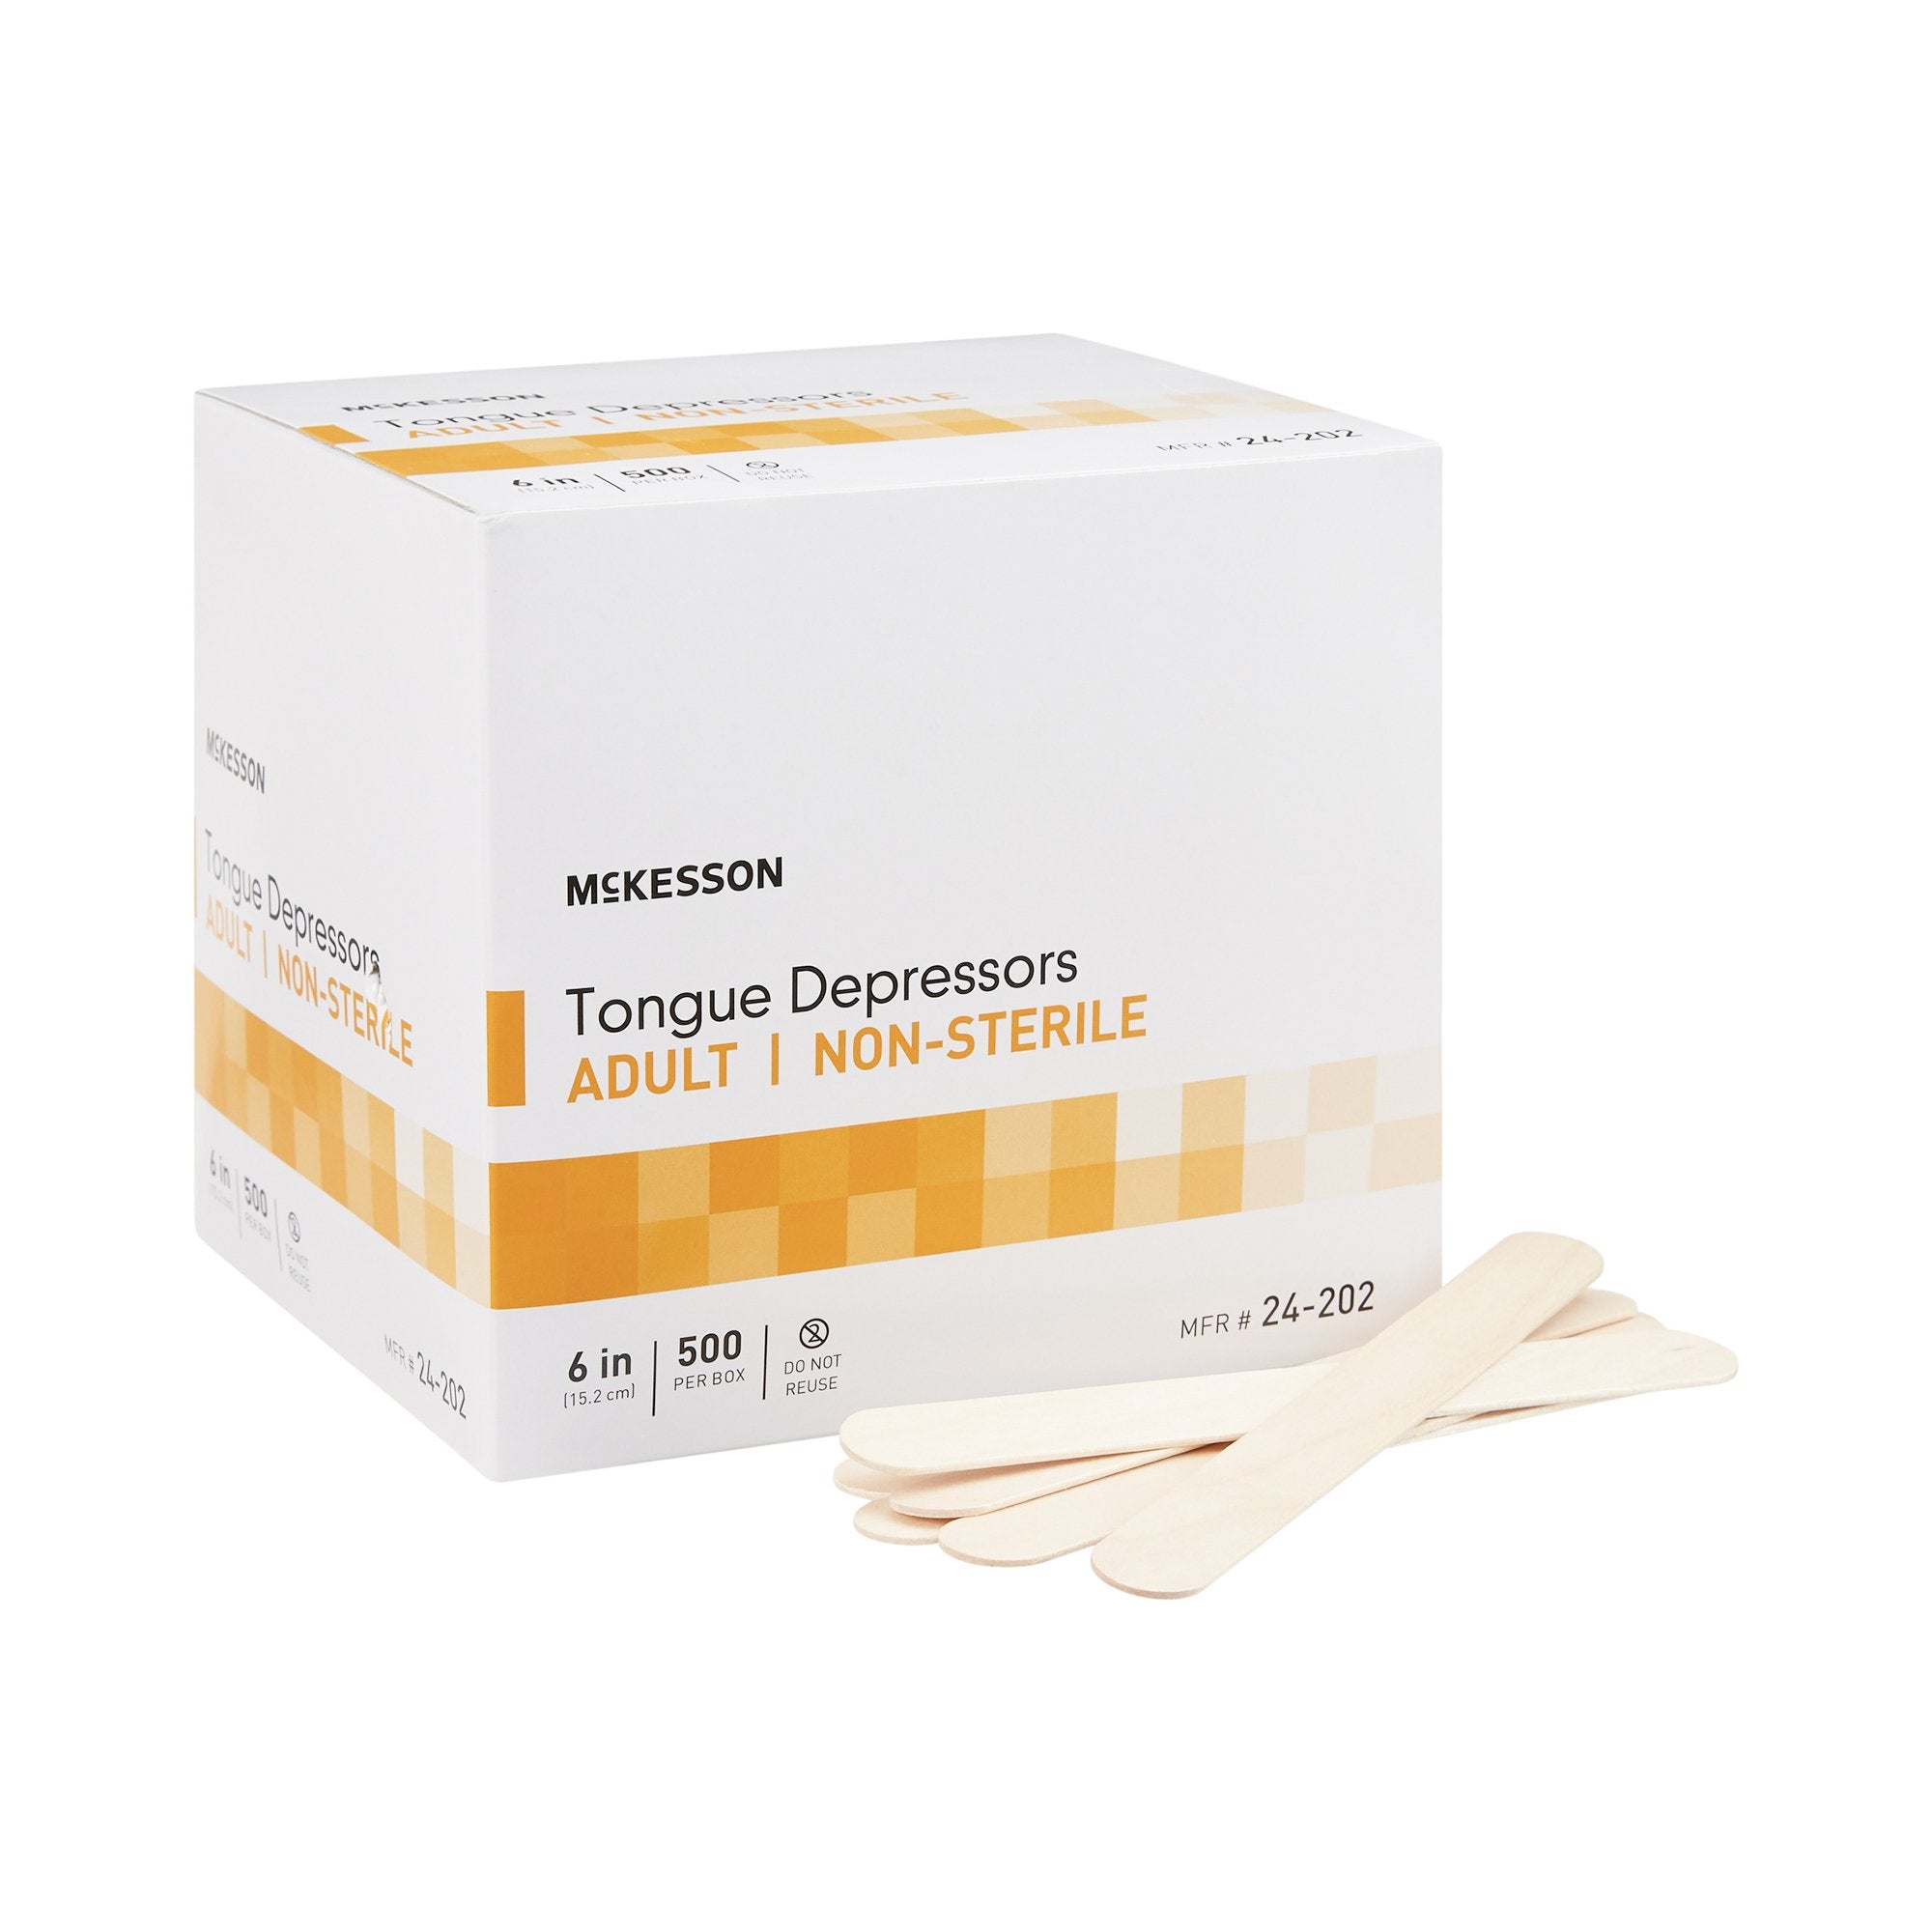 Dynarex Tongue Depressors Wood, Senior 6, Non-Sterile, with